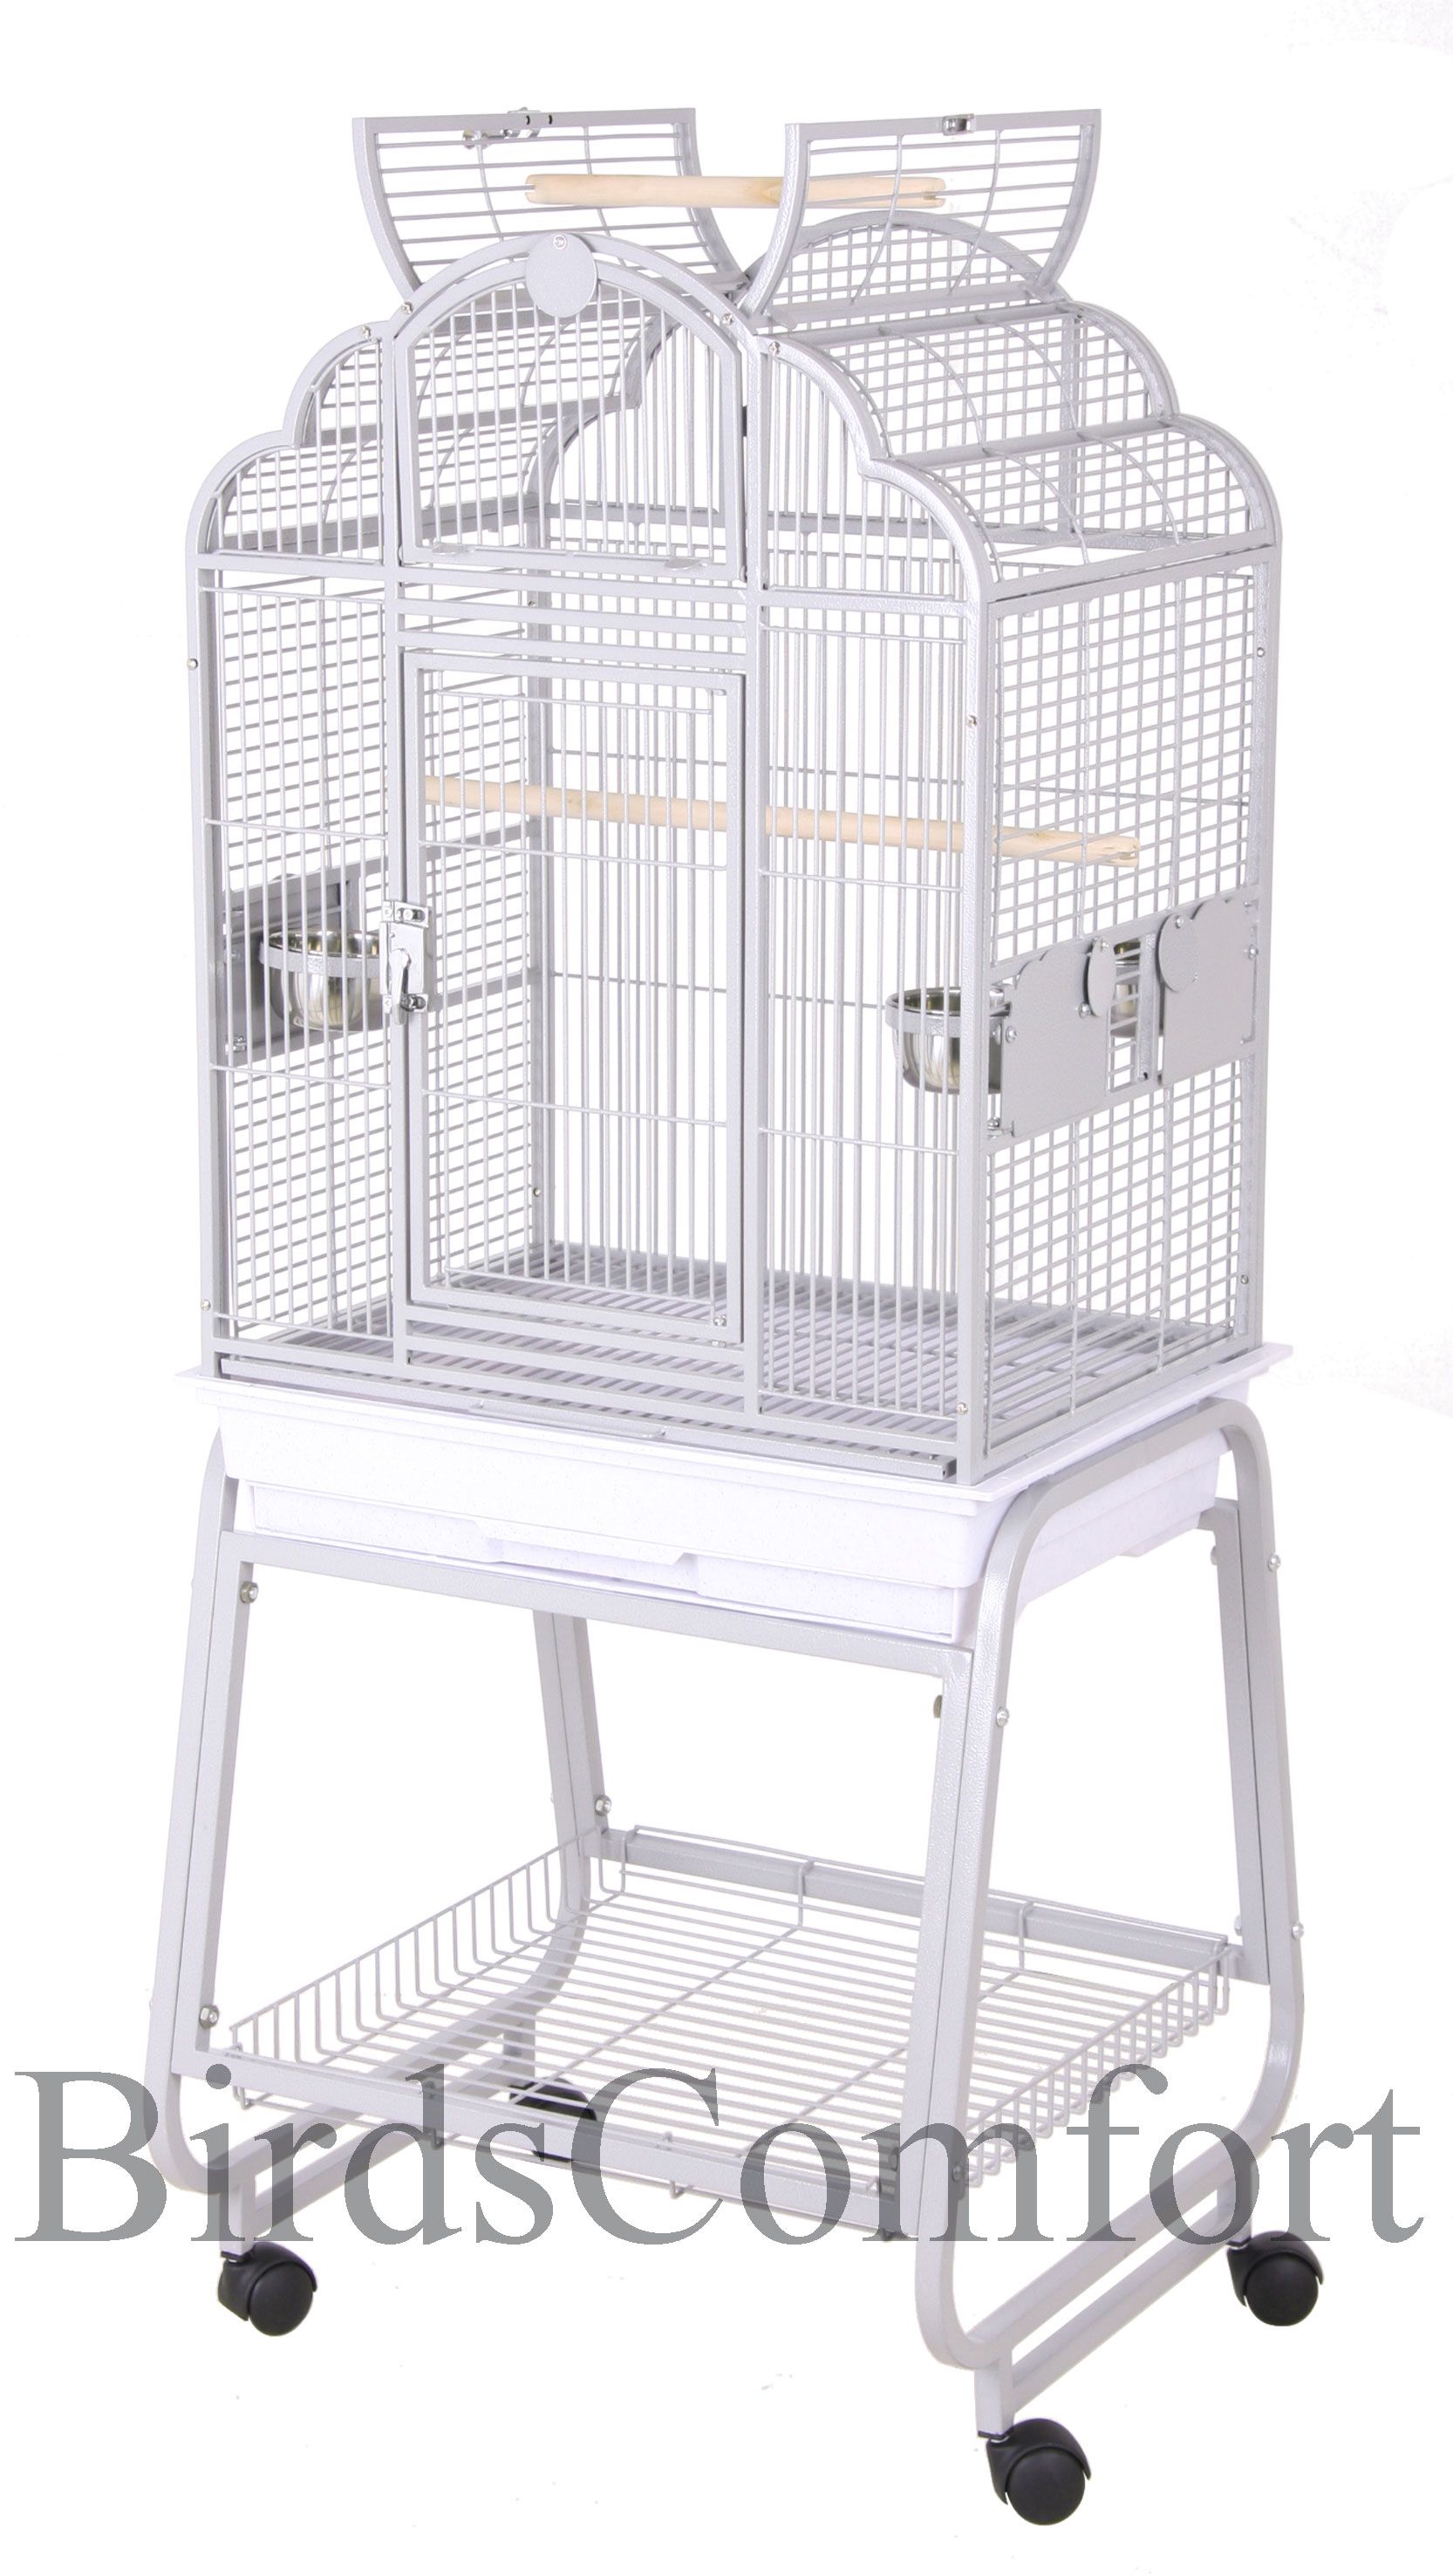 HQ Bird Cage Victorian is ideal bird cage for small birds such as